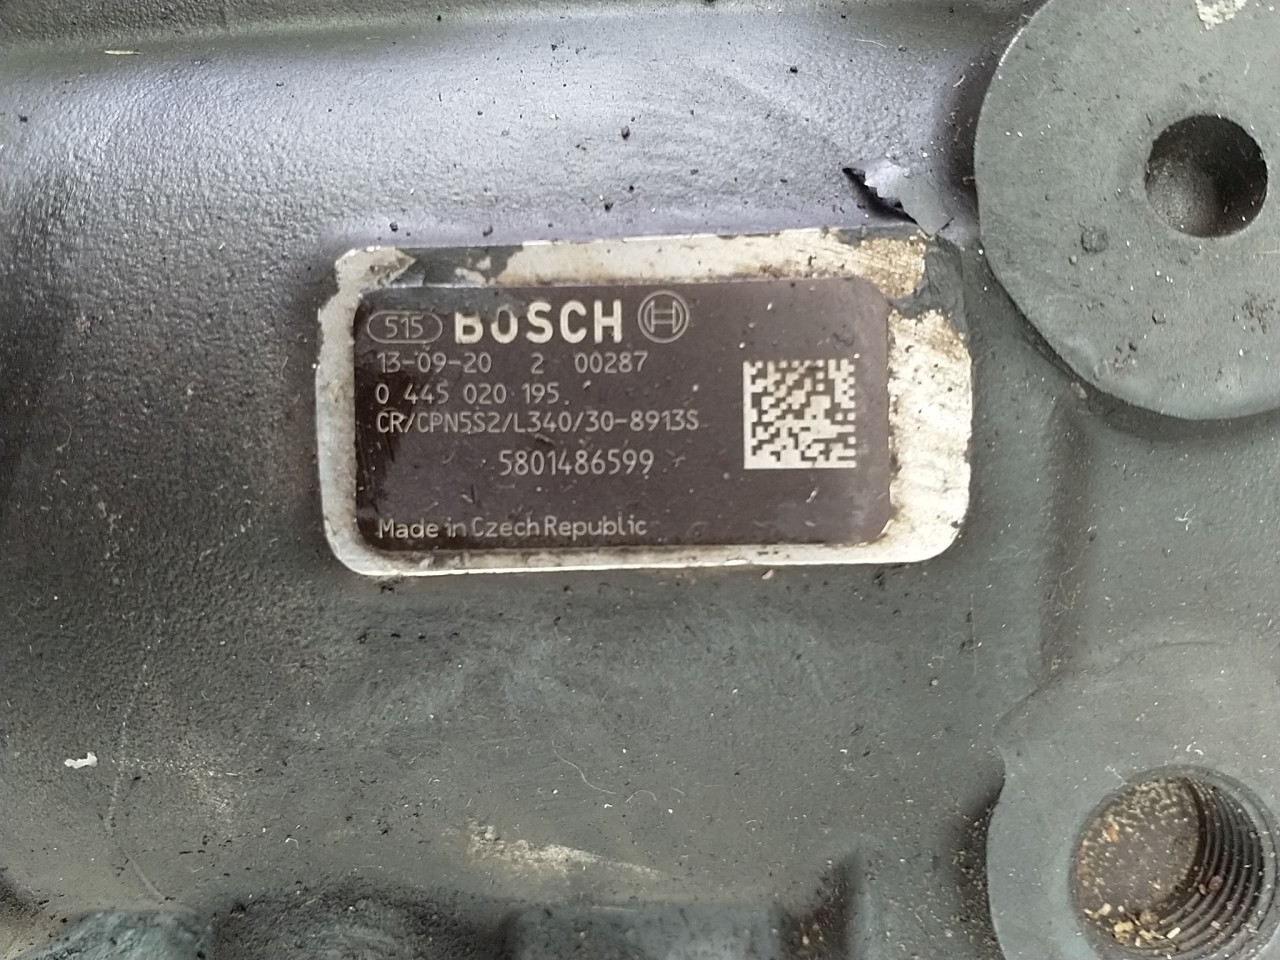 5801486599 Bosch 0445020195 Pompa Inalta Presiune Iveco Stralis AD AS AT Trakker AD New Holland T9